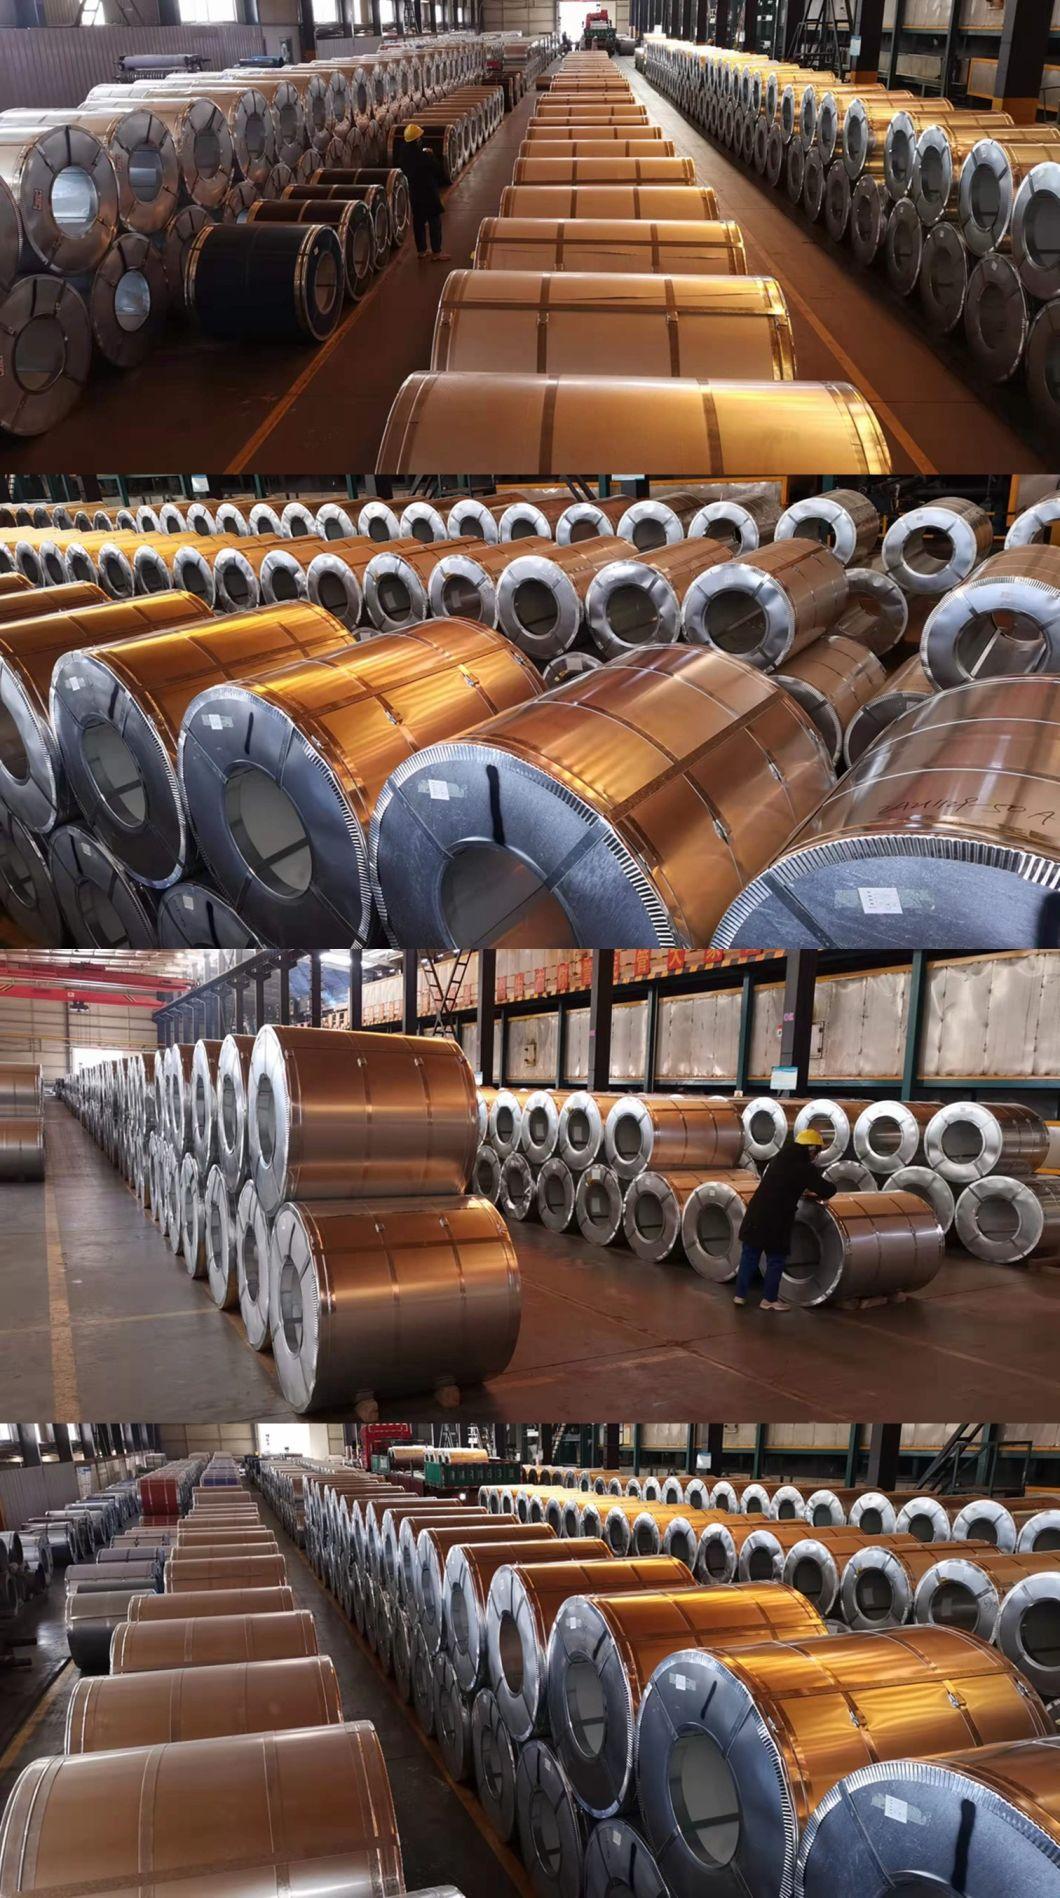 0.12-2.0mm*600-1250mm JIS Coils Price Roll Hot DIP Mild Steel in China Galvanized Coil